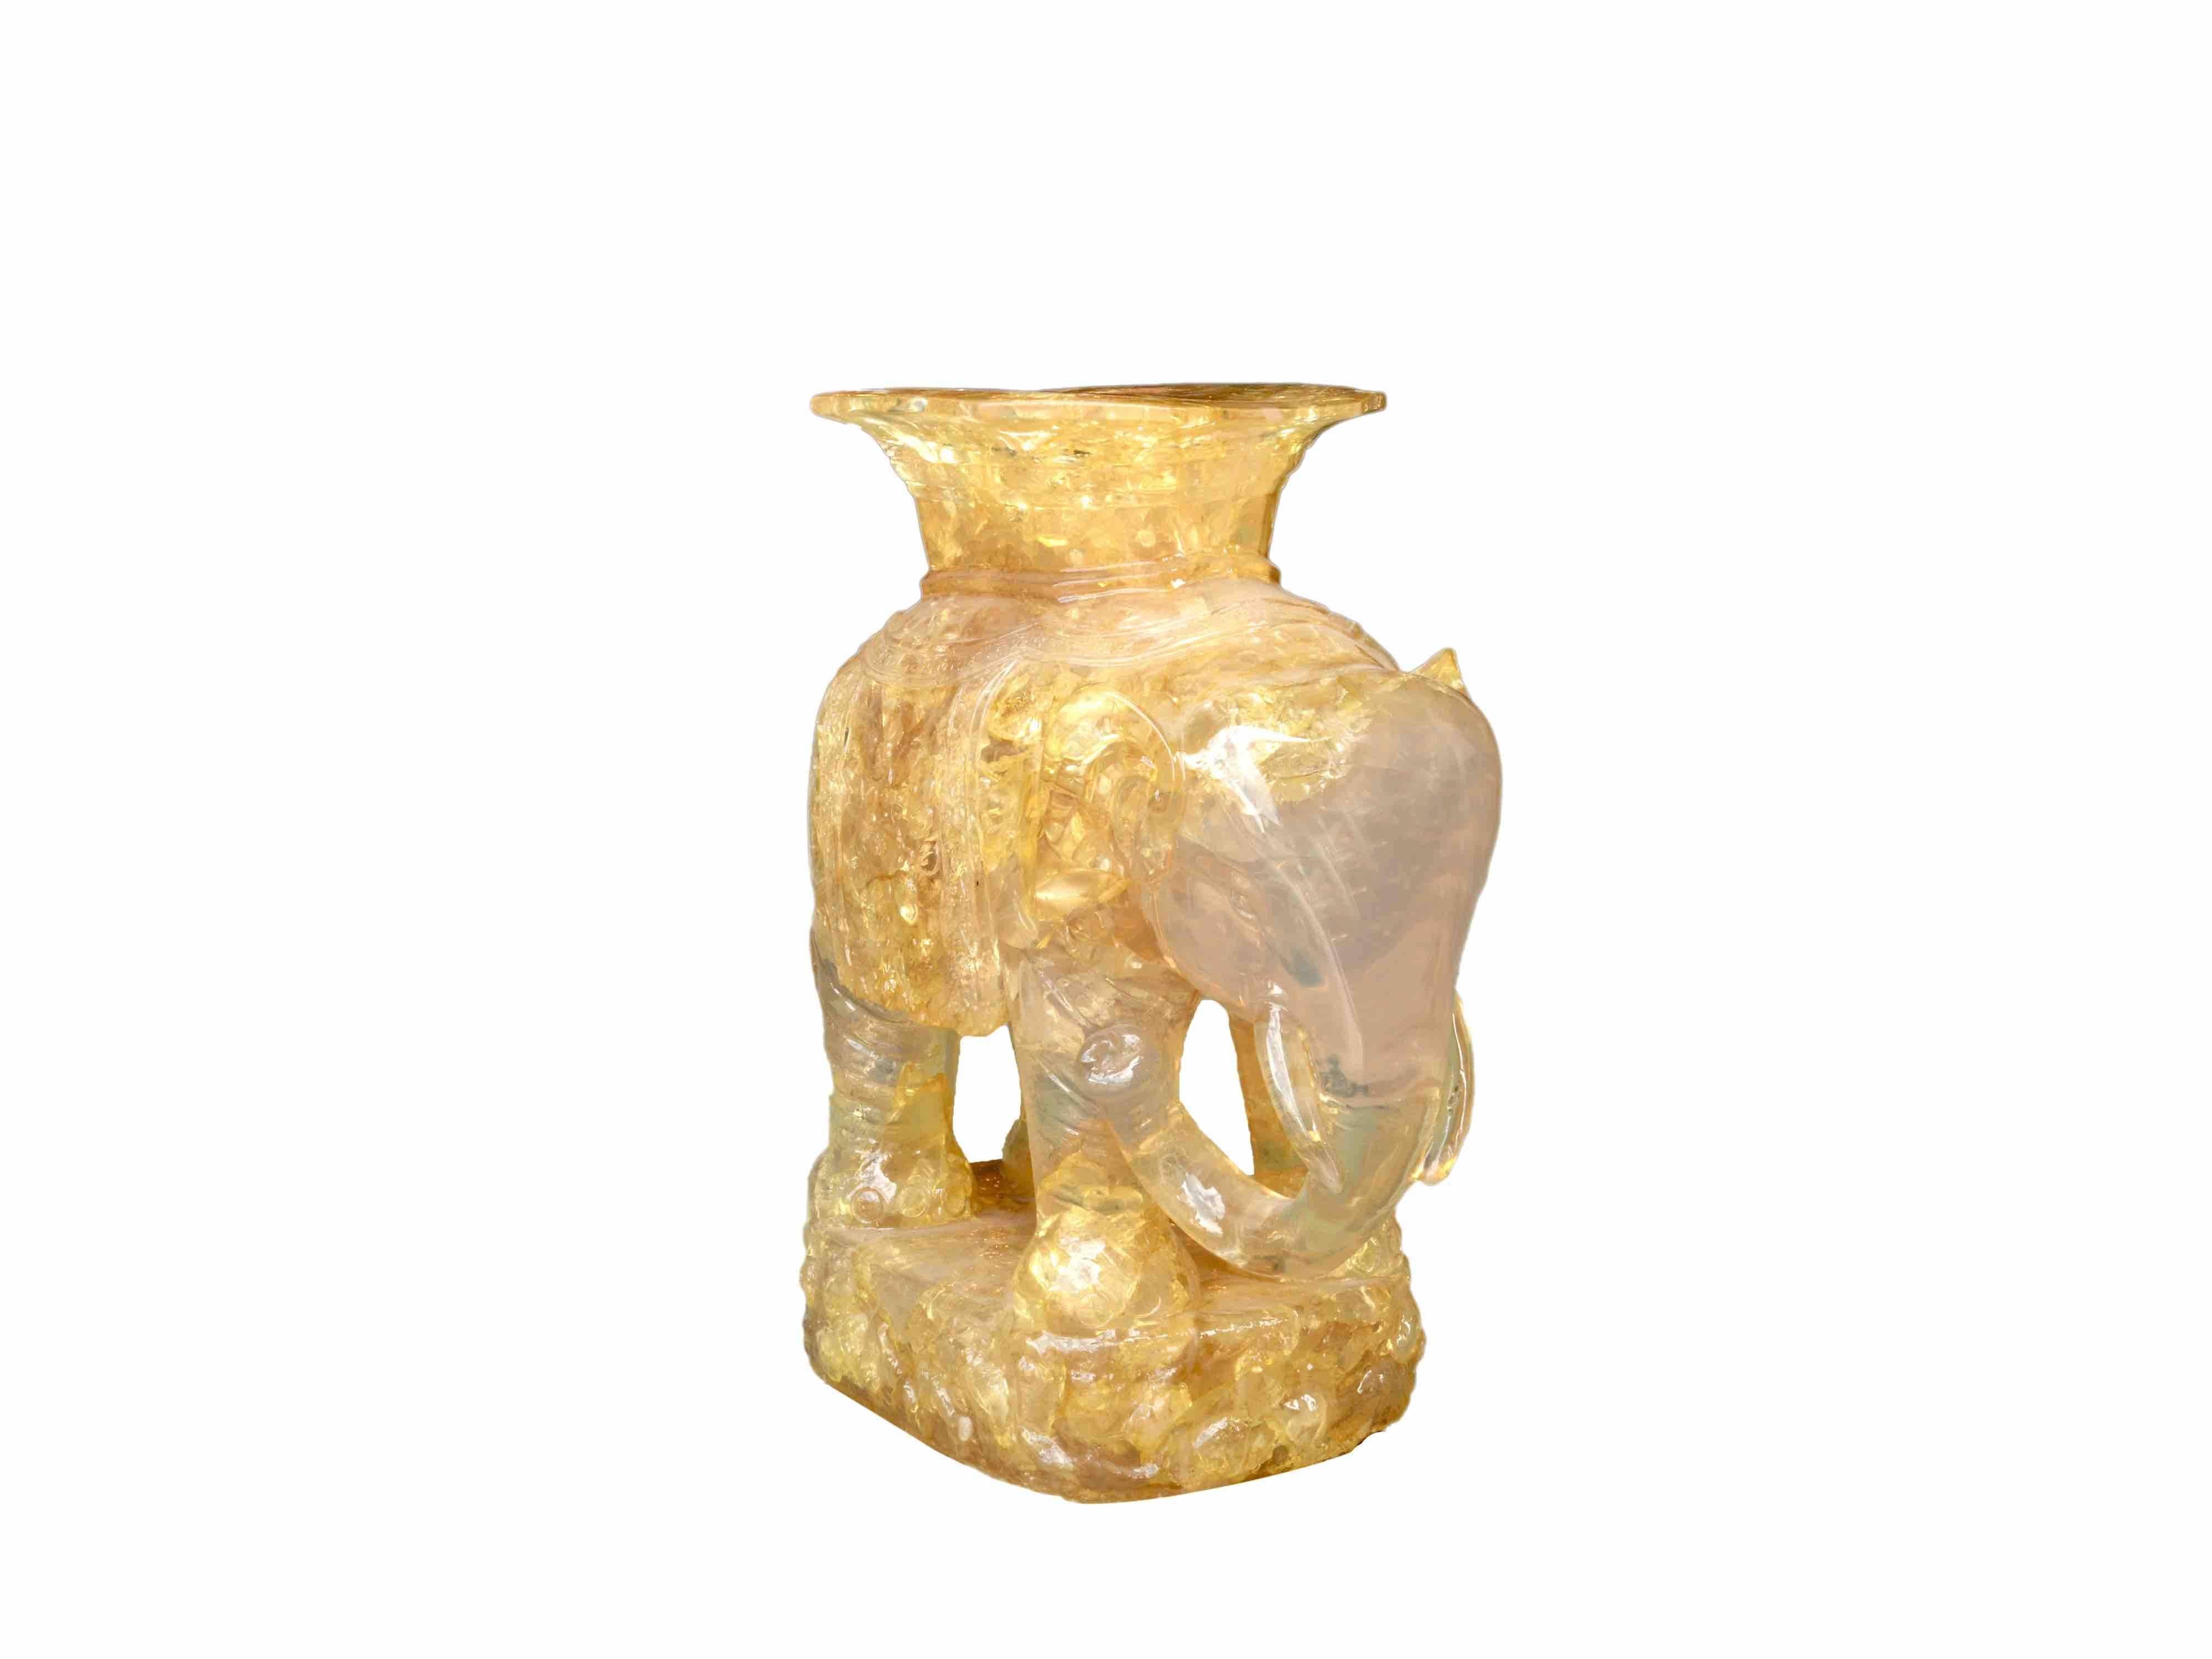 Pierre Giraudon
Elephant
Fractal yellow resin
France, circa 1970.
This piece was a specific order from Christian Dior to Pierre Giraudon in the early 1970s.
The elephant has a flat top so the sculpture may be use as a side table or pedestal.